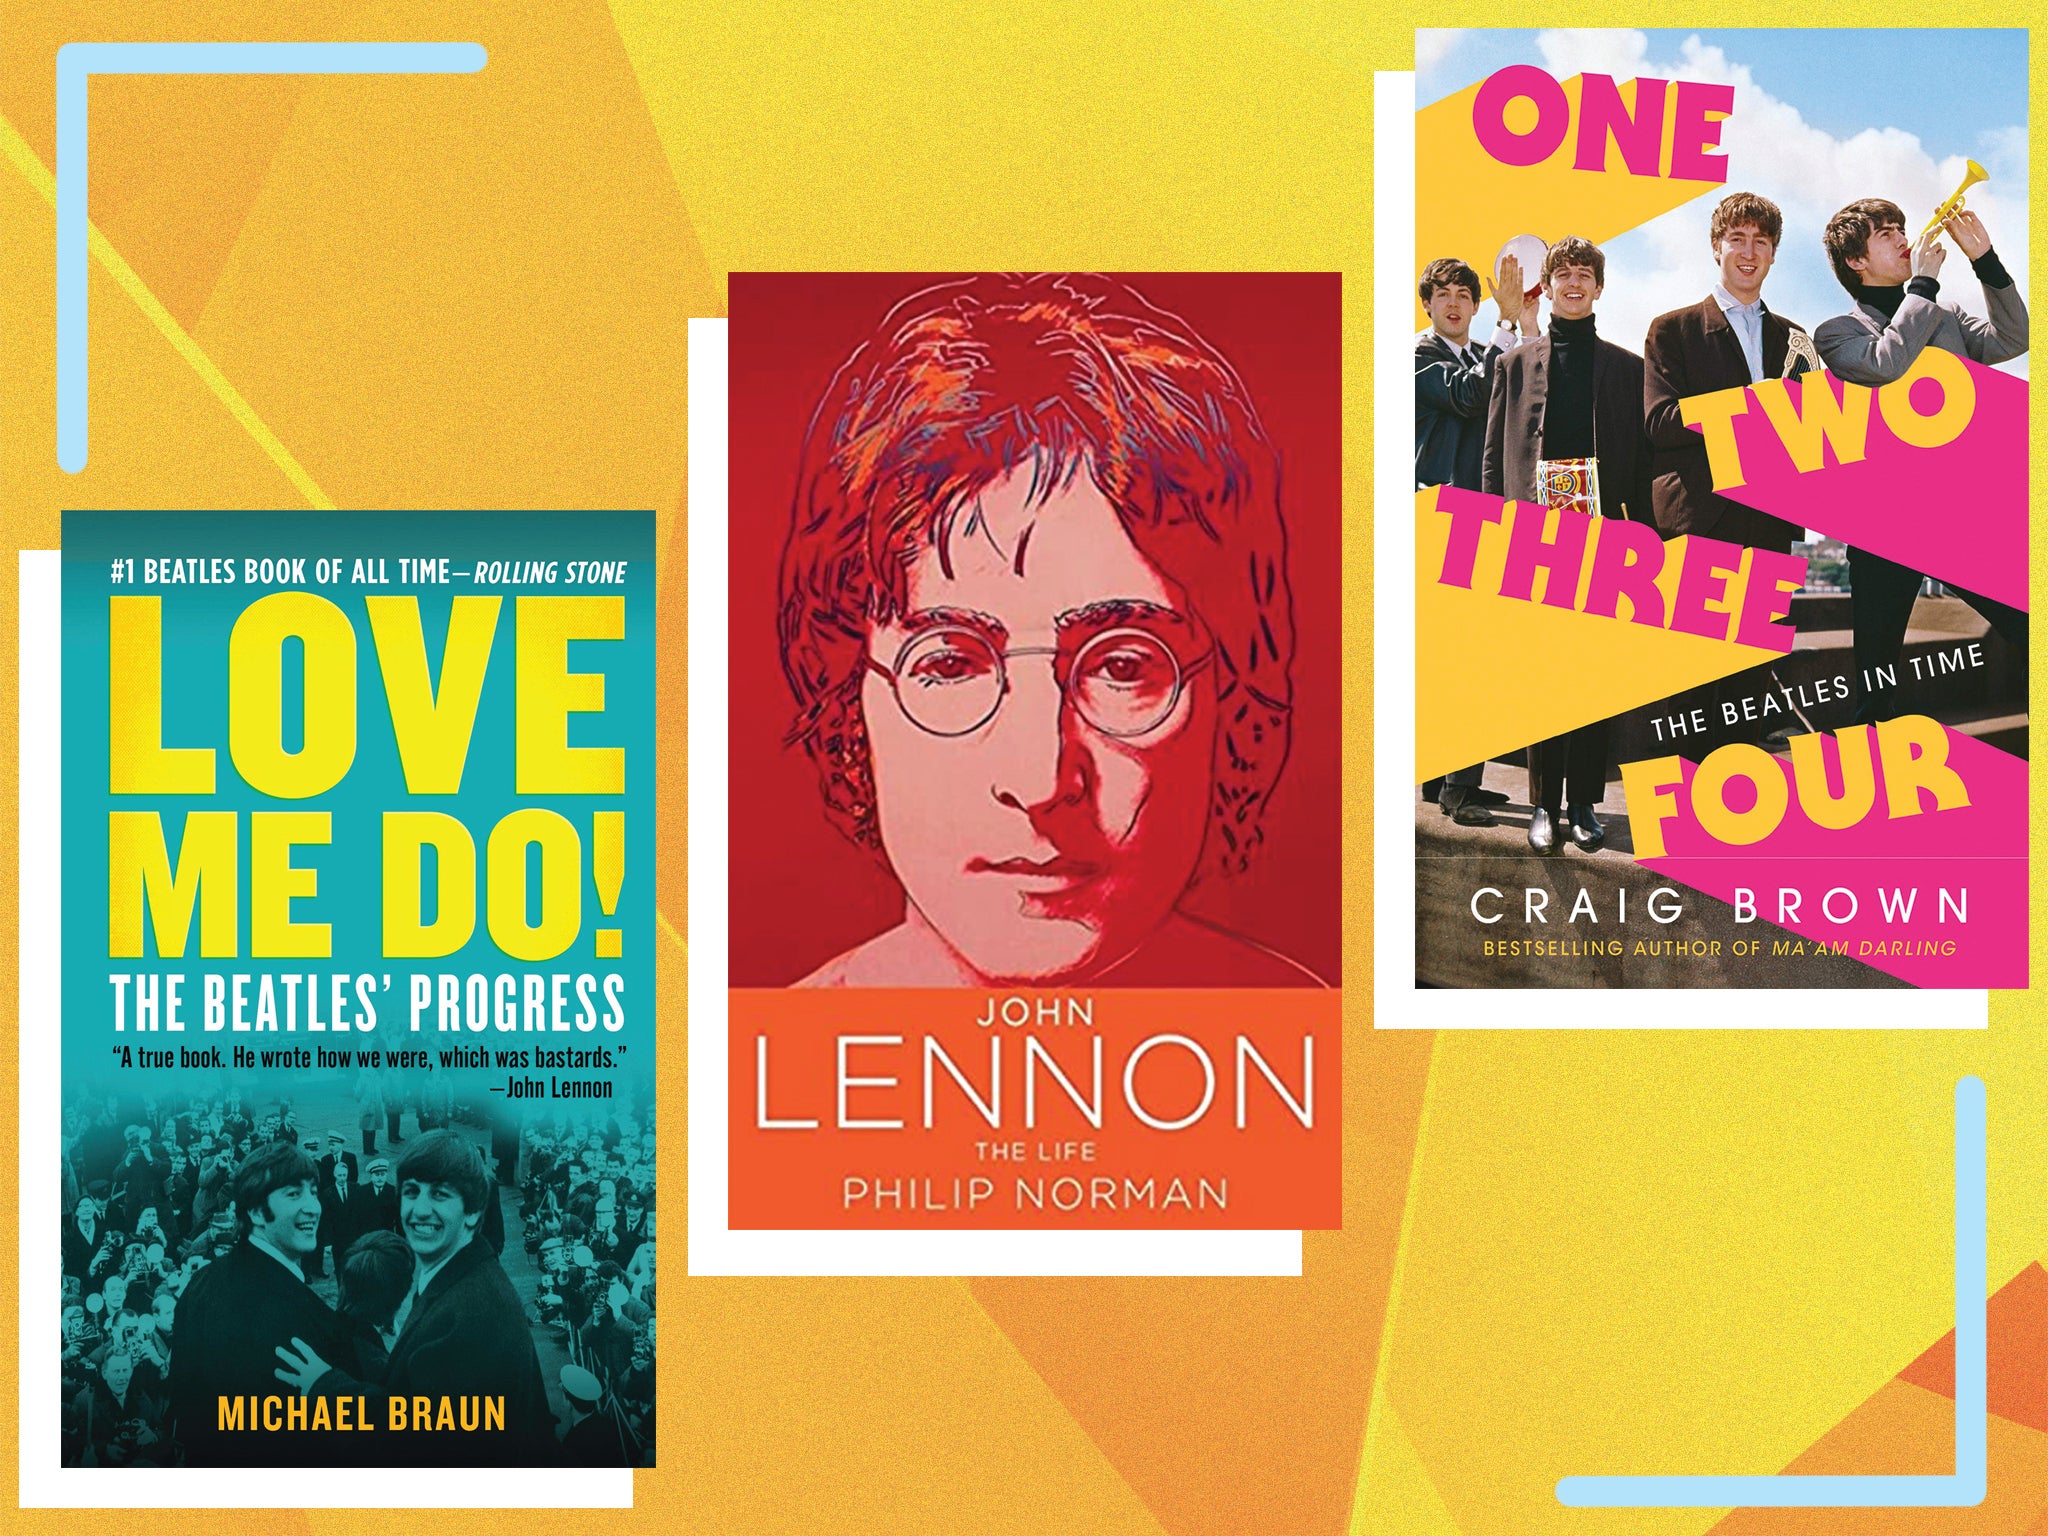 During the decades after the band’s split, their rise and fall has been told as a myth, these tomes will help you better understand their history